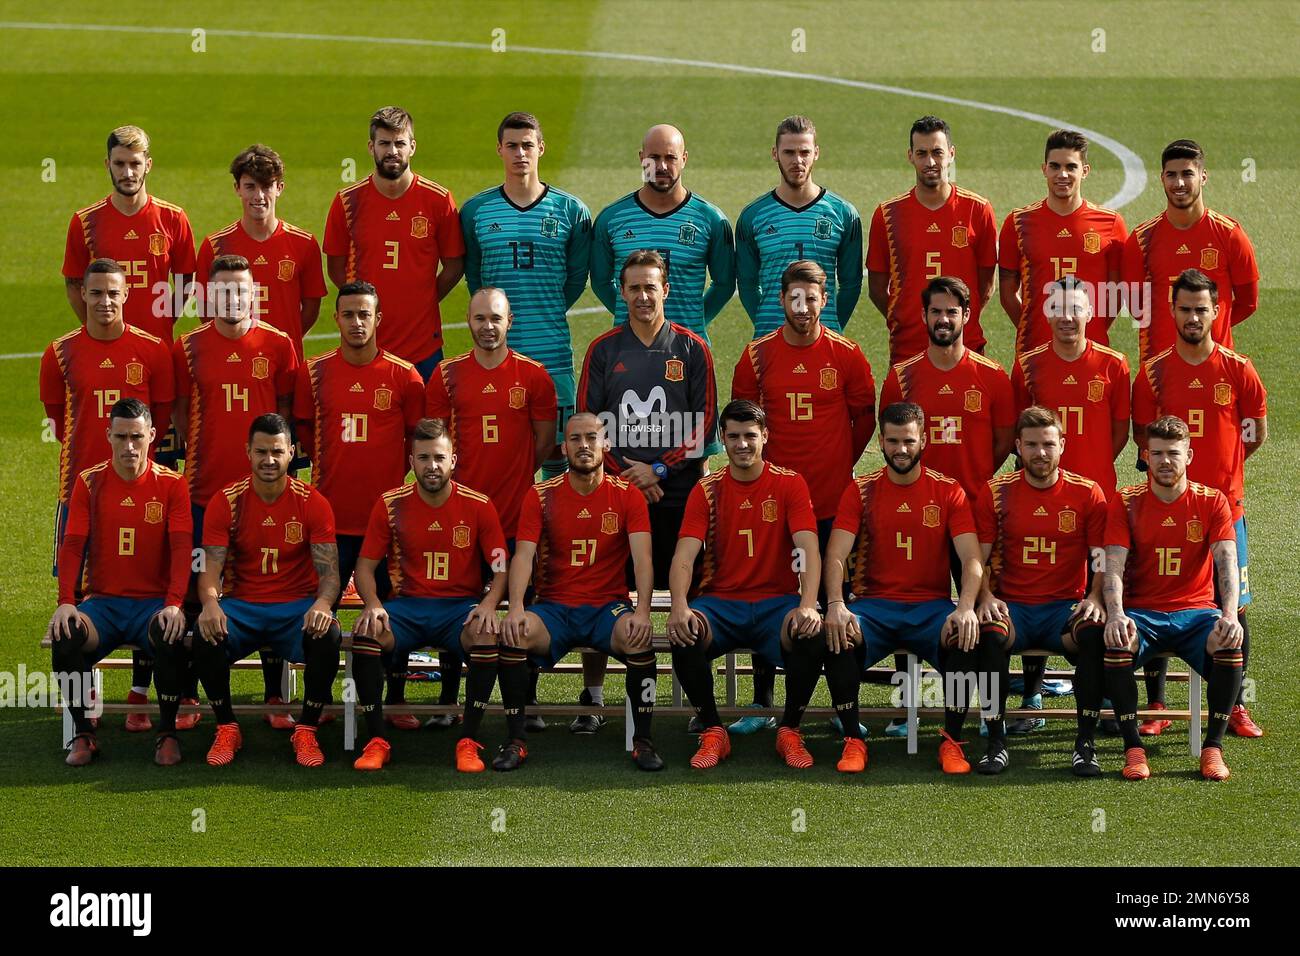 Spain's players wearing their new soccer kit for the 2018 World Cup pose  for a family photo before a training session in Las Rozas, outskirts  Madrid, Spain, Wednesday, Nov. 8, 2017. Spain